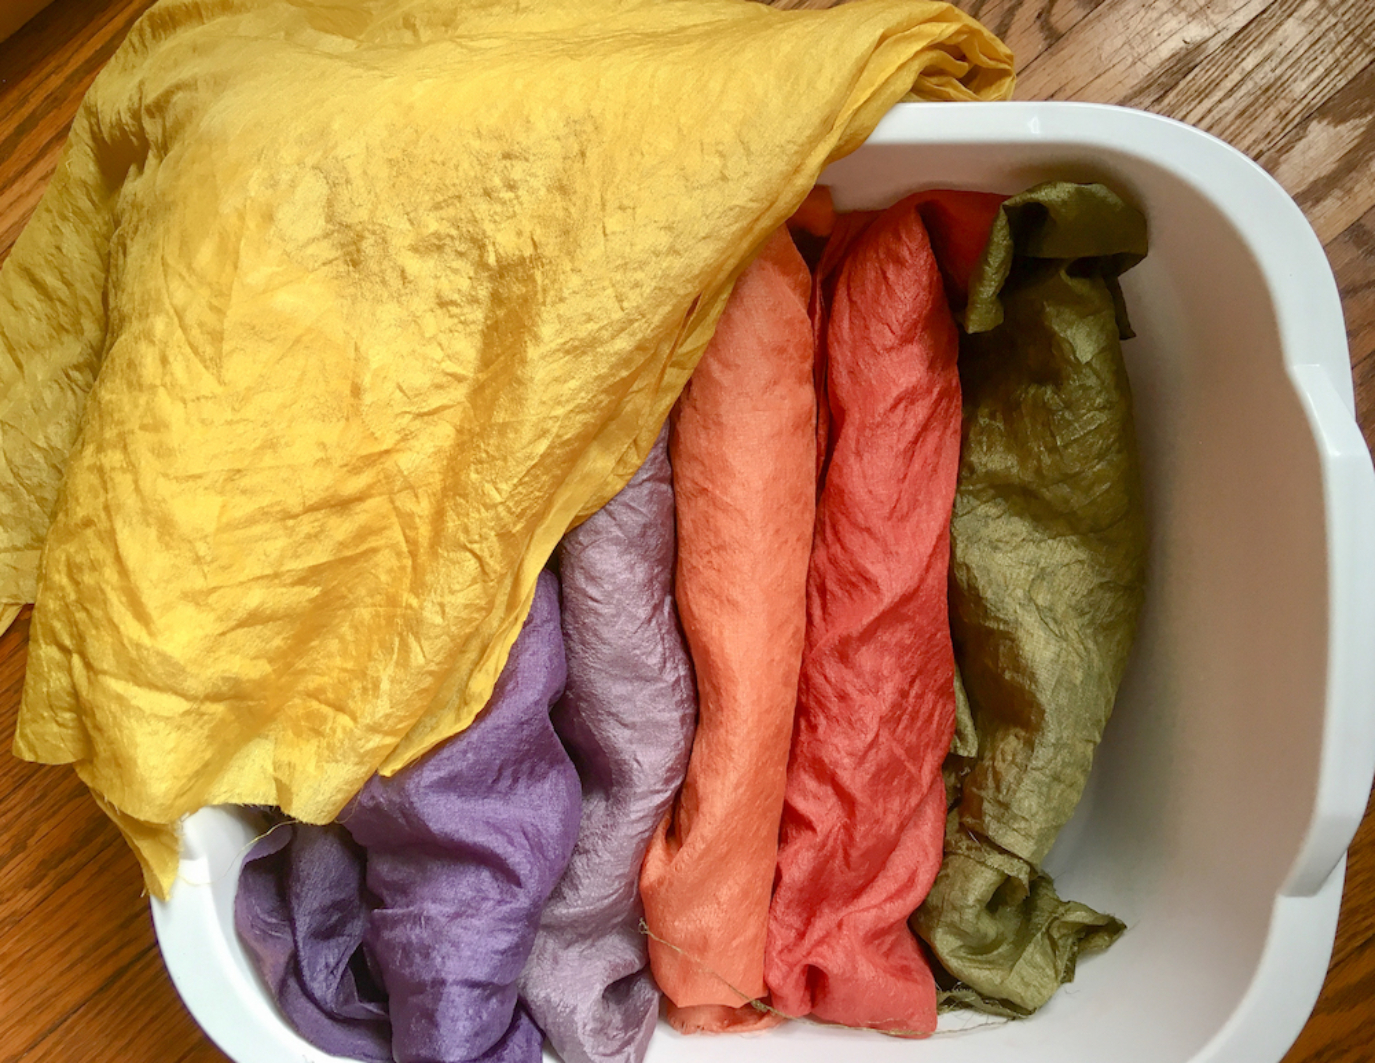 A white plastic tub filled with hand dyed fabrics rolled up to be used for the puppet. Six silks rolled and placed side by side, left-right: yellow draping over a corner of the bucket, with purple, lavender, orange, red, and green.